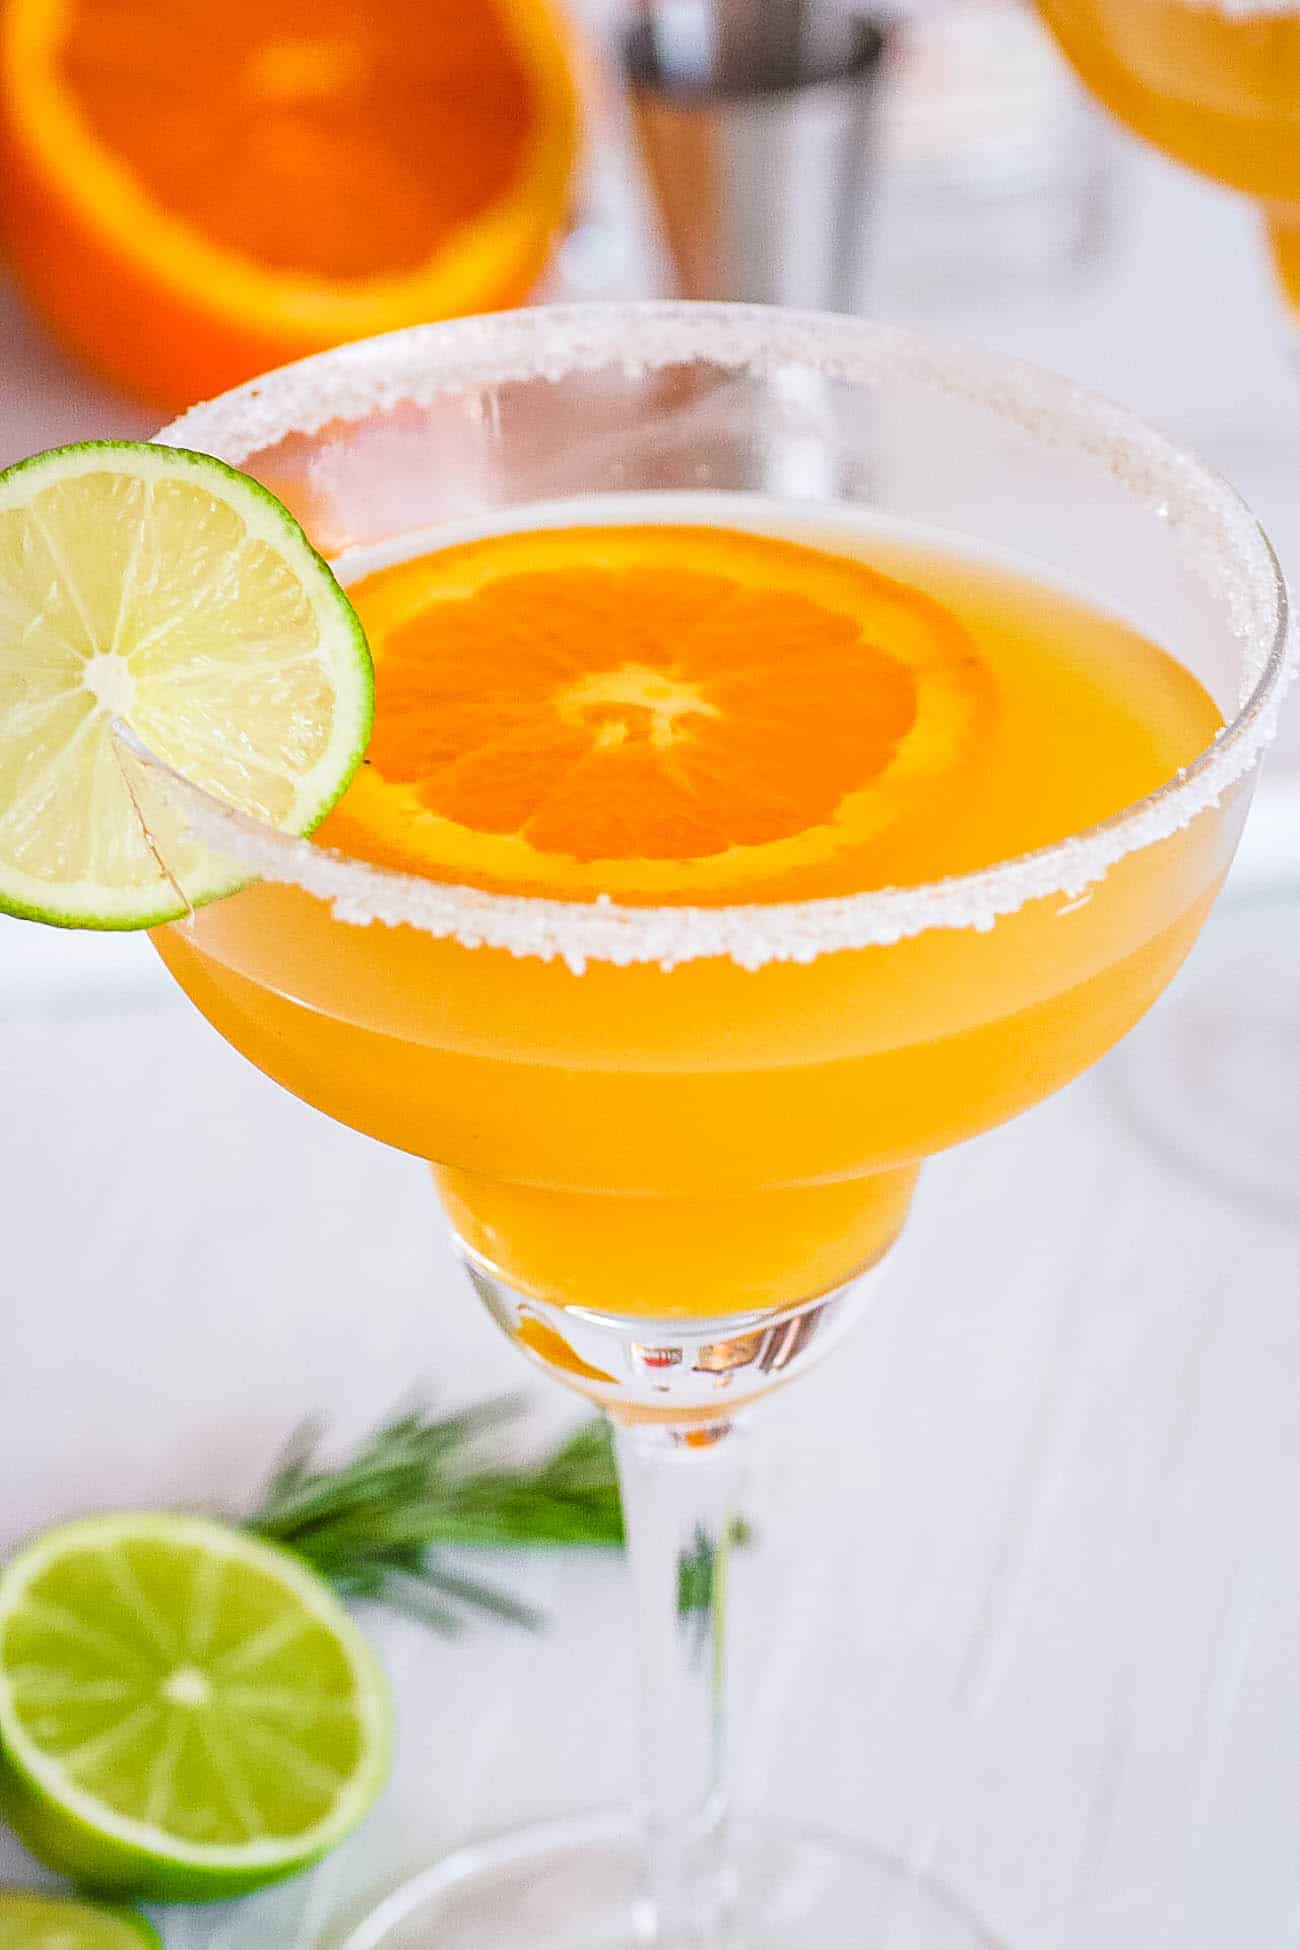 Italian margarita in a glass with orange and lime